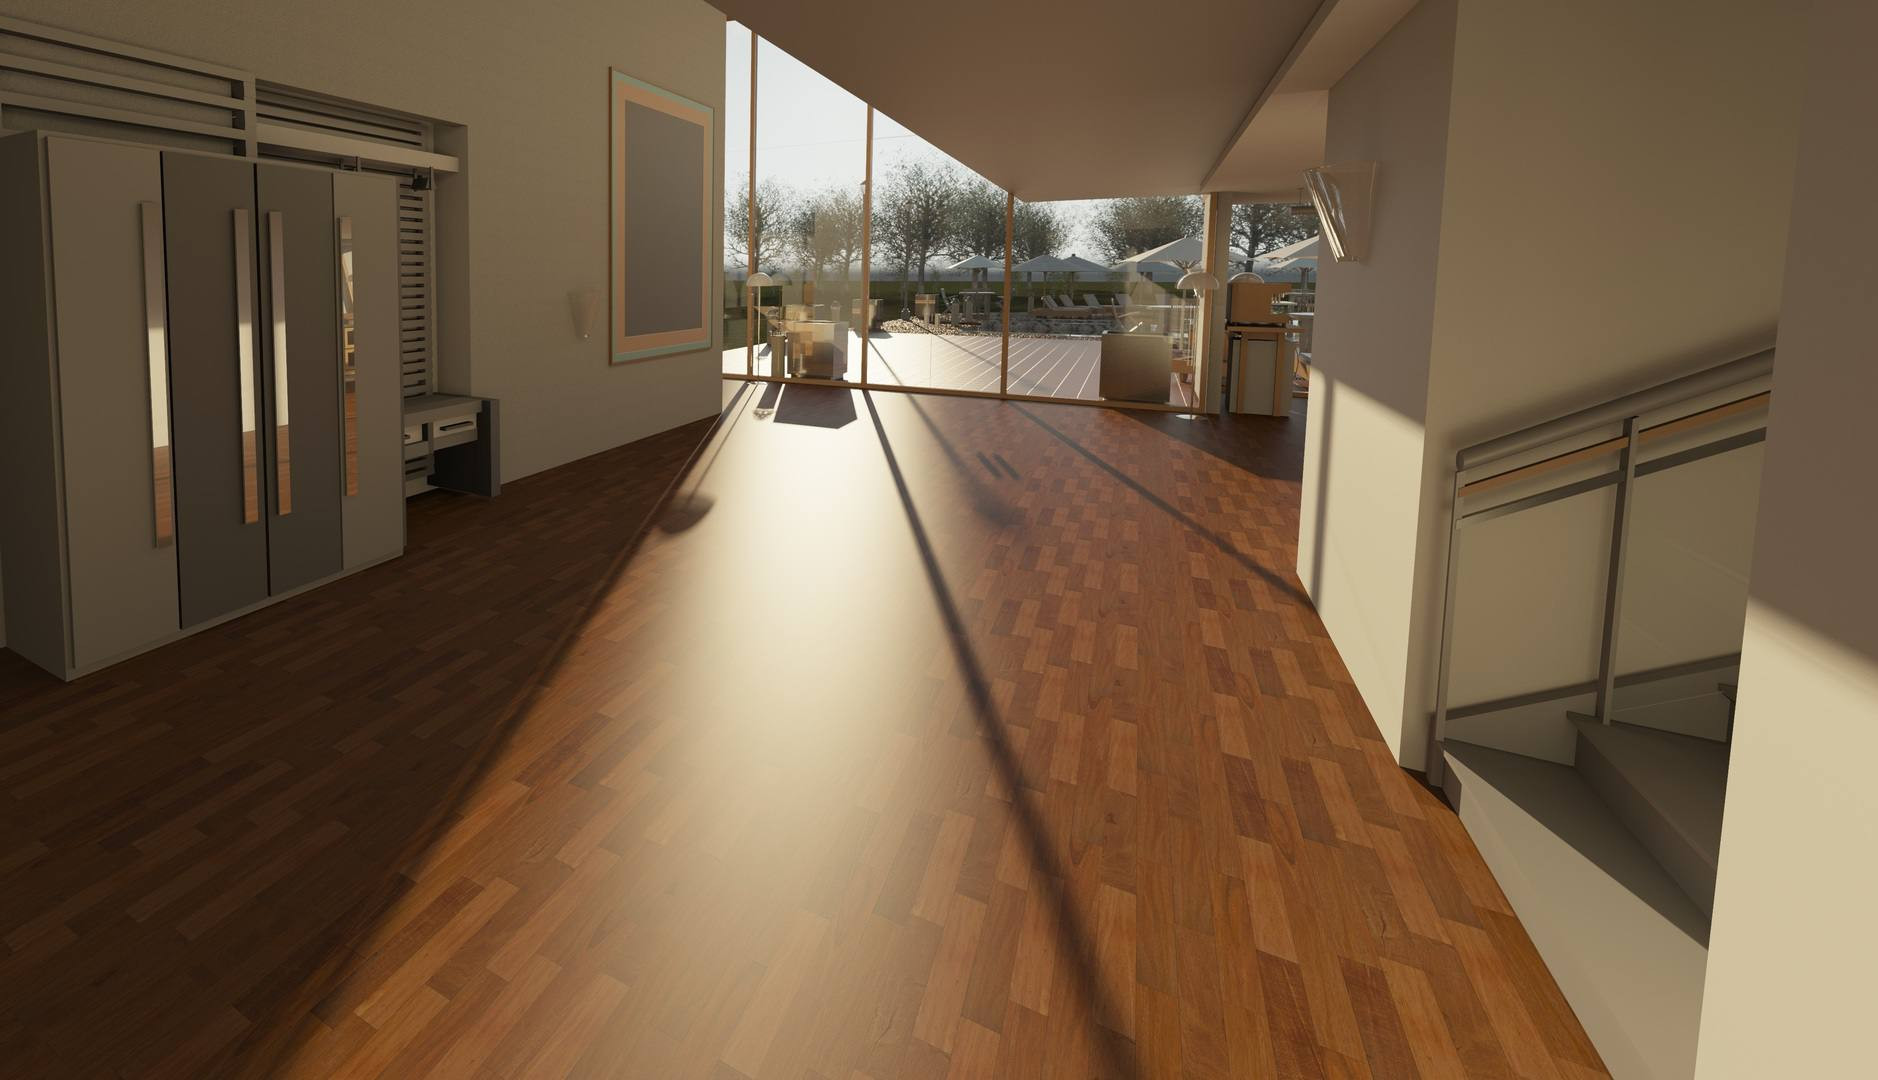 23 Spectacular Hardwood Floor Over Concrete 2024 free download hardwood floor over concrete of common flooring types currently used in renovation and building throughout architecture wood house floor interior window 917178 pxhere com 5ba27a2cc9e77c00503